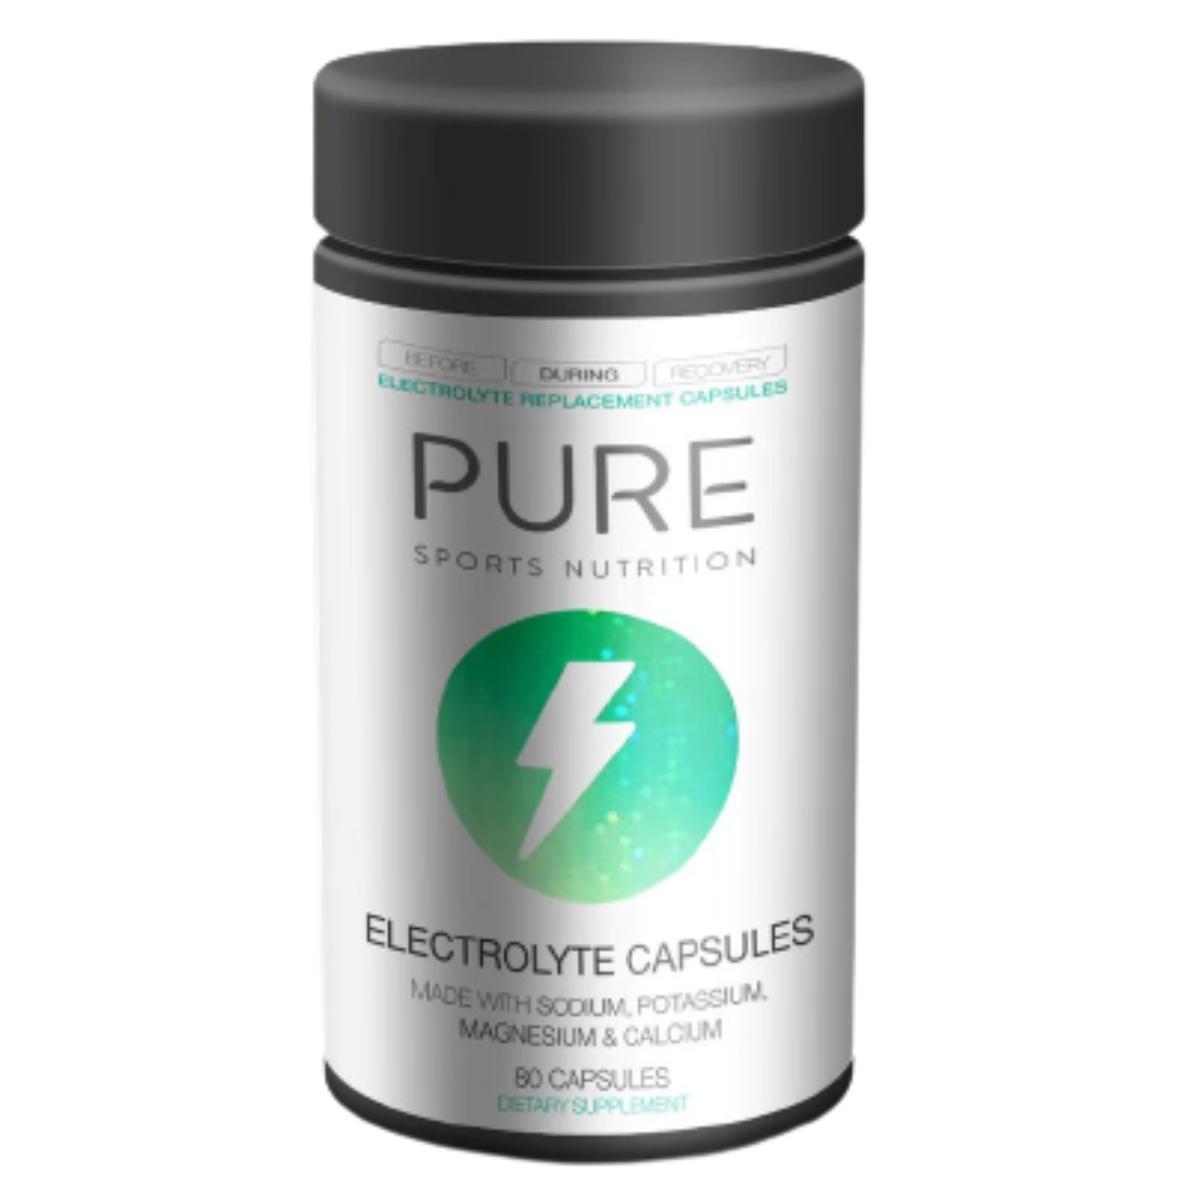 Pure Sports Nutrition - Electrolyte Replacement Capsules - 80 Capsules